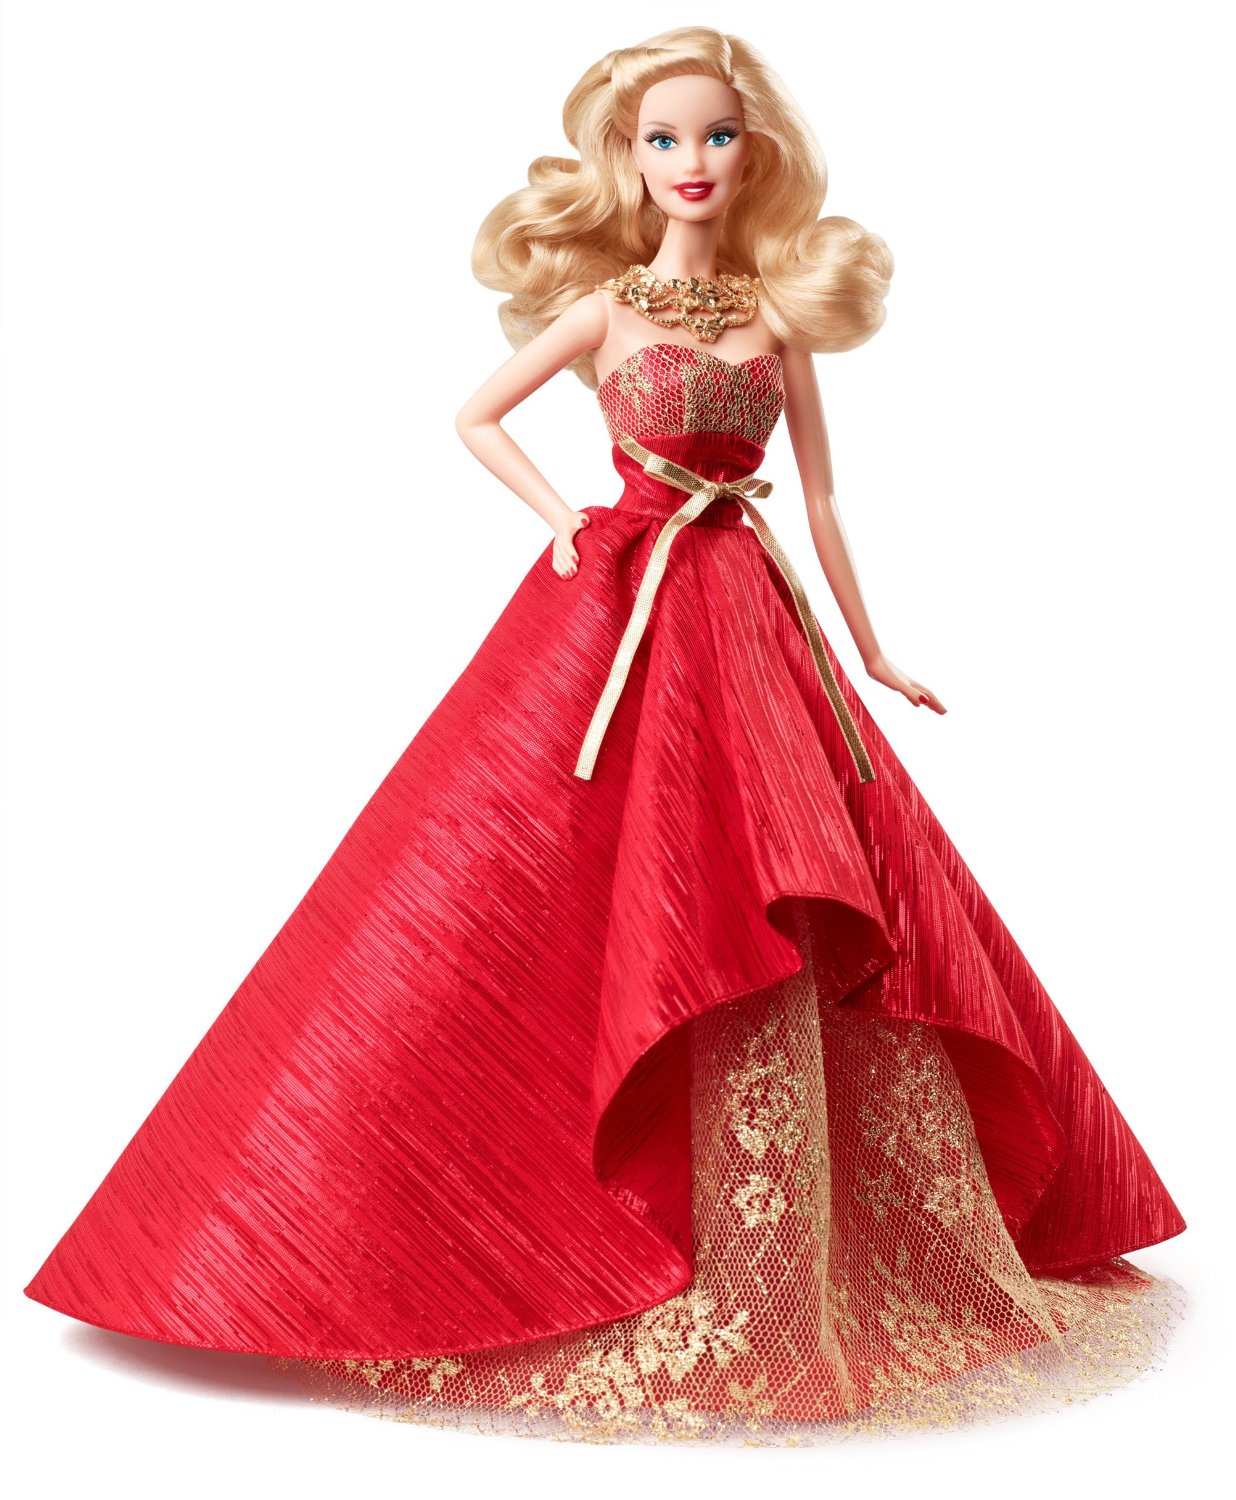 Barbie Collector 2014 Holiday Doll Only $12.50 on Amazon!